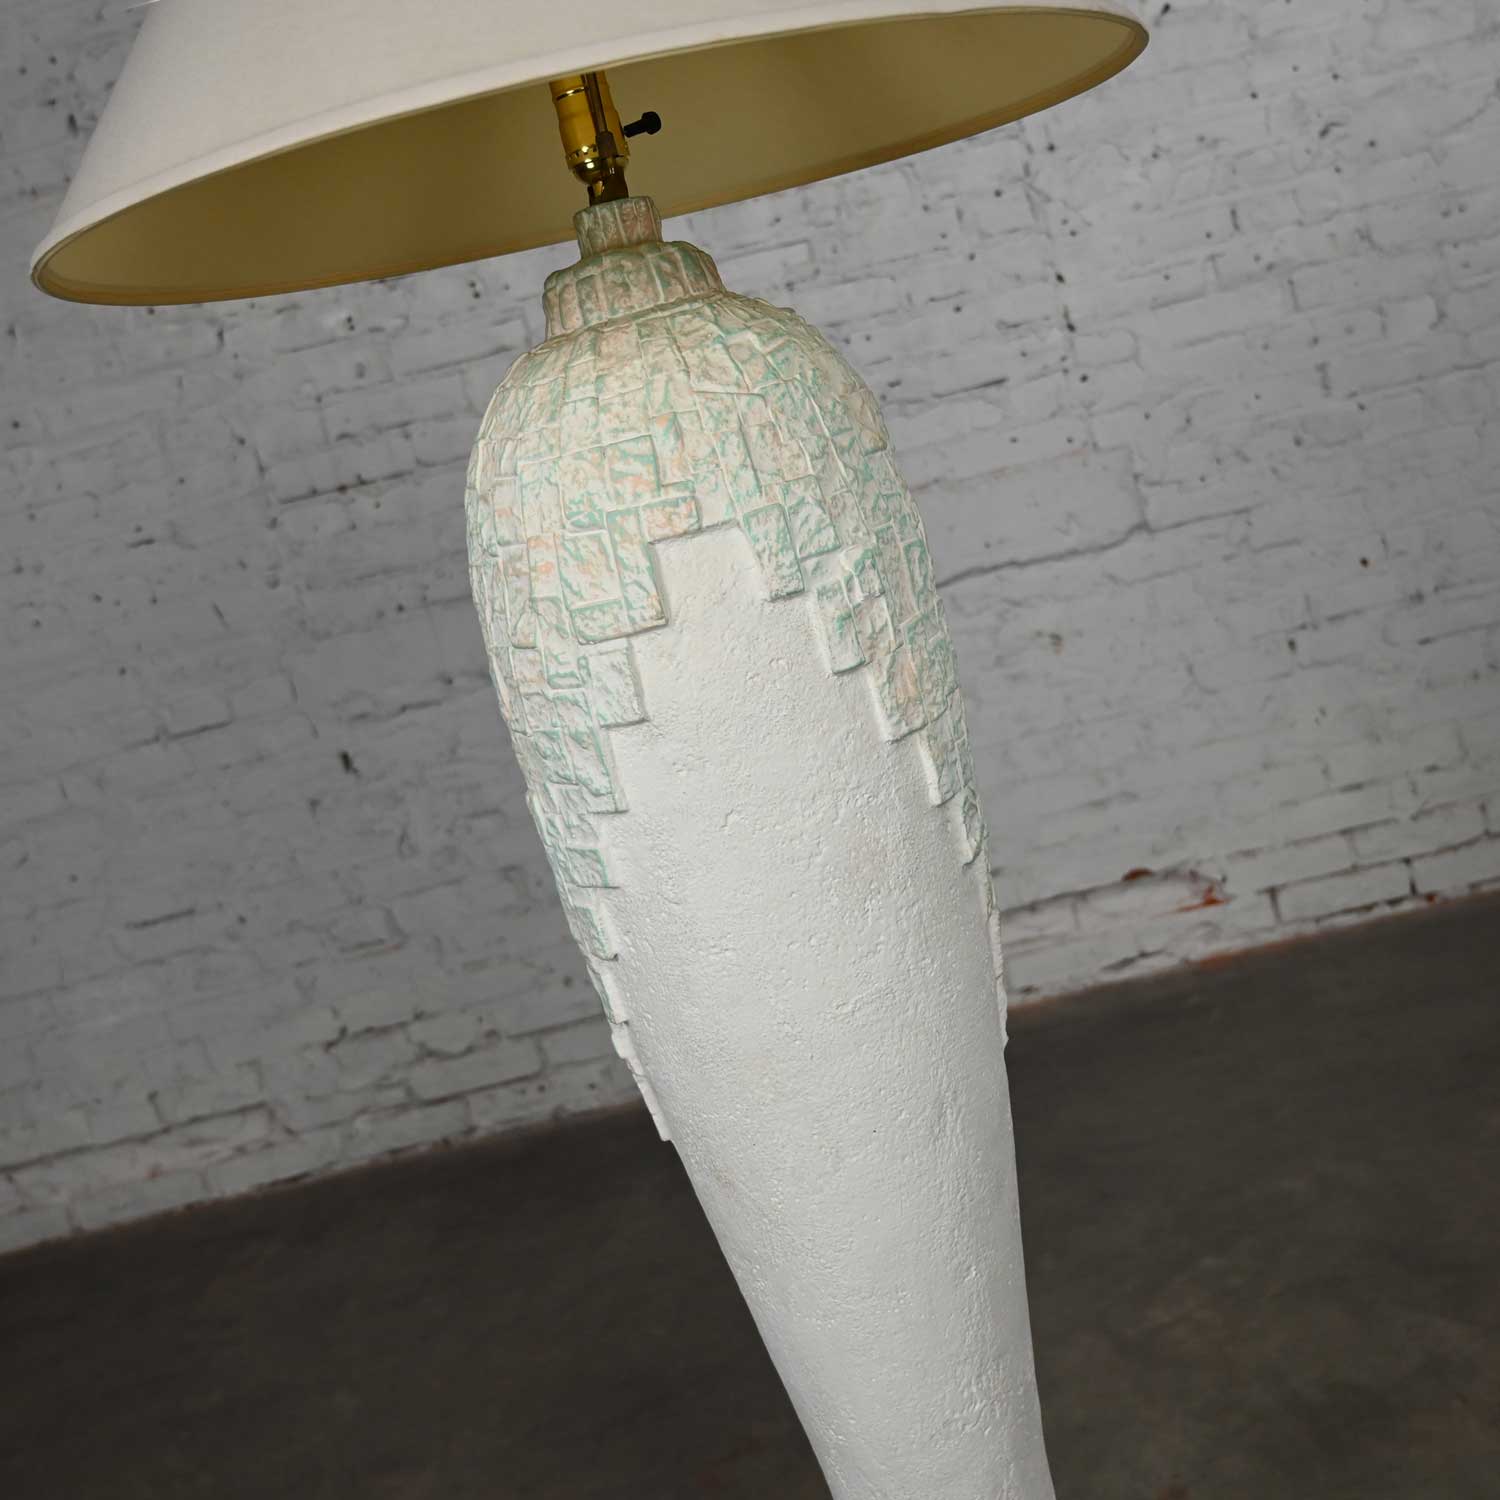 Late 20th Century Modern to Postmodern Southwest Style Textured Plaster Sculptural Floor Lamp